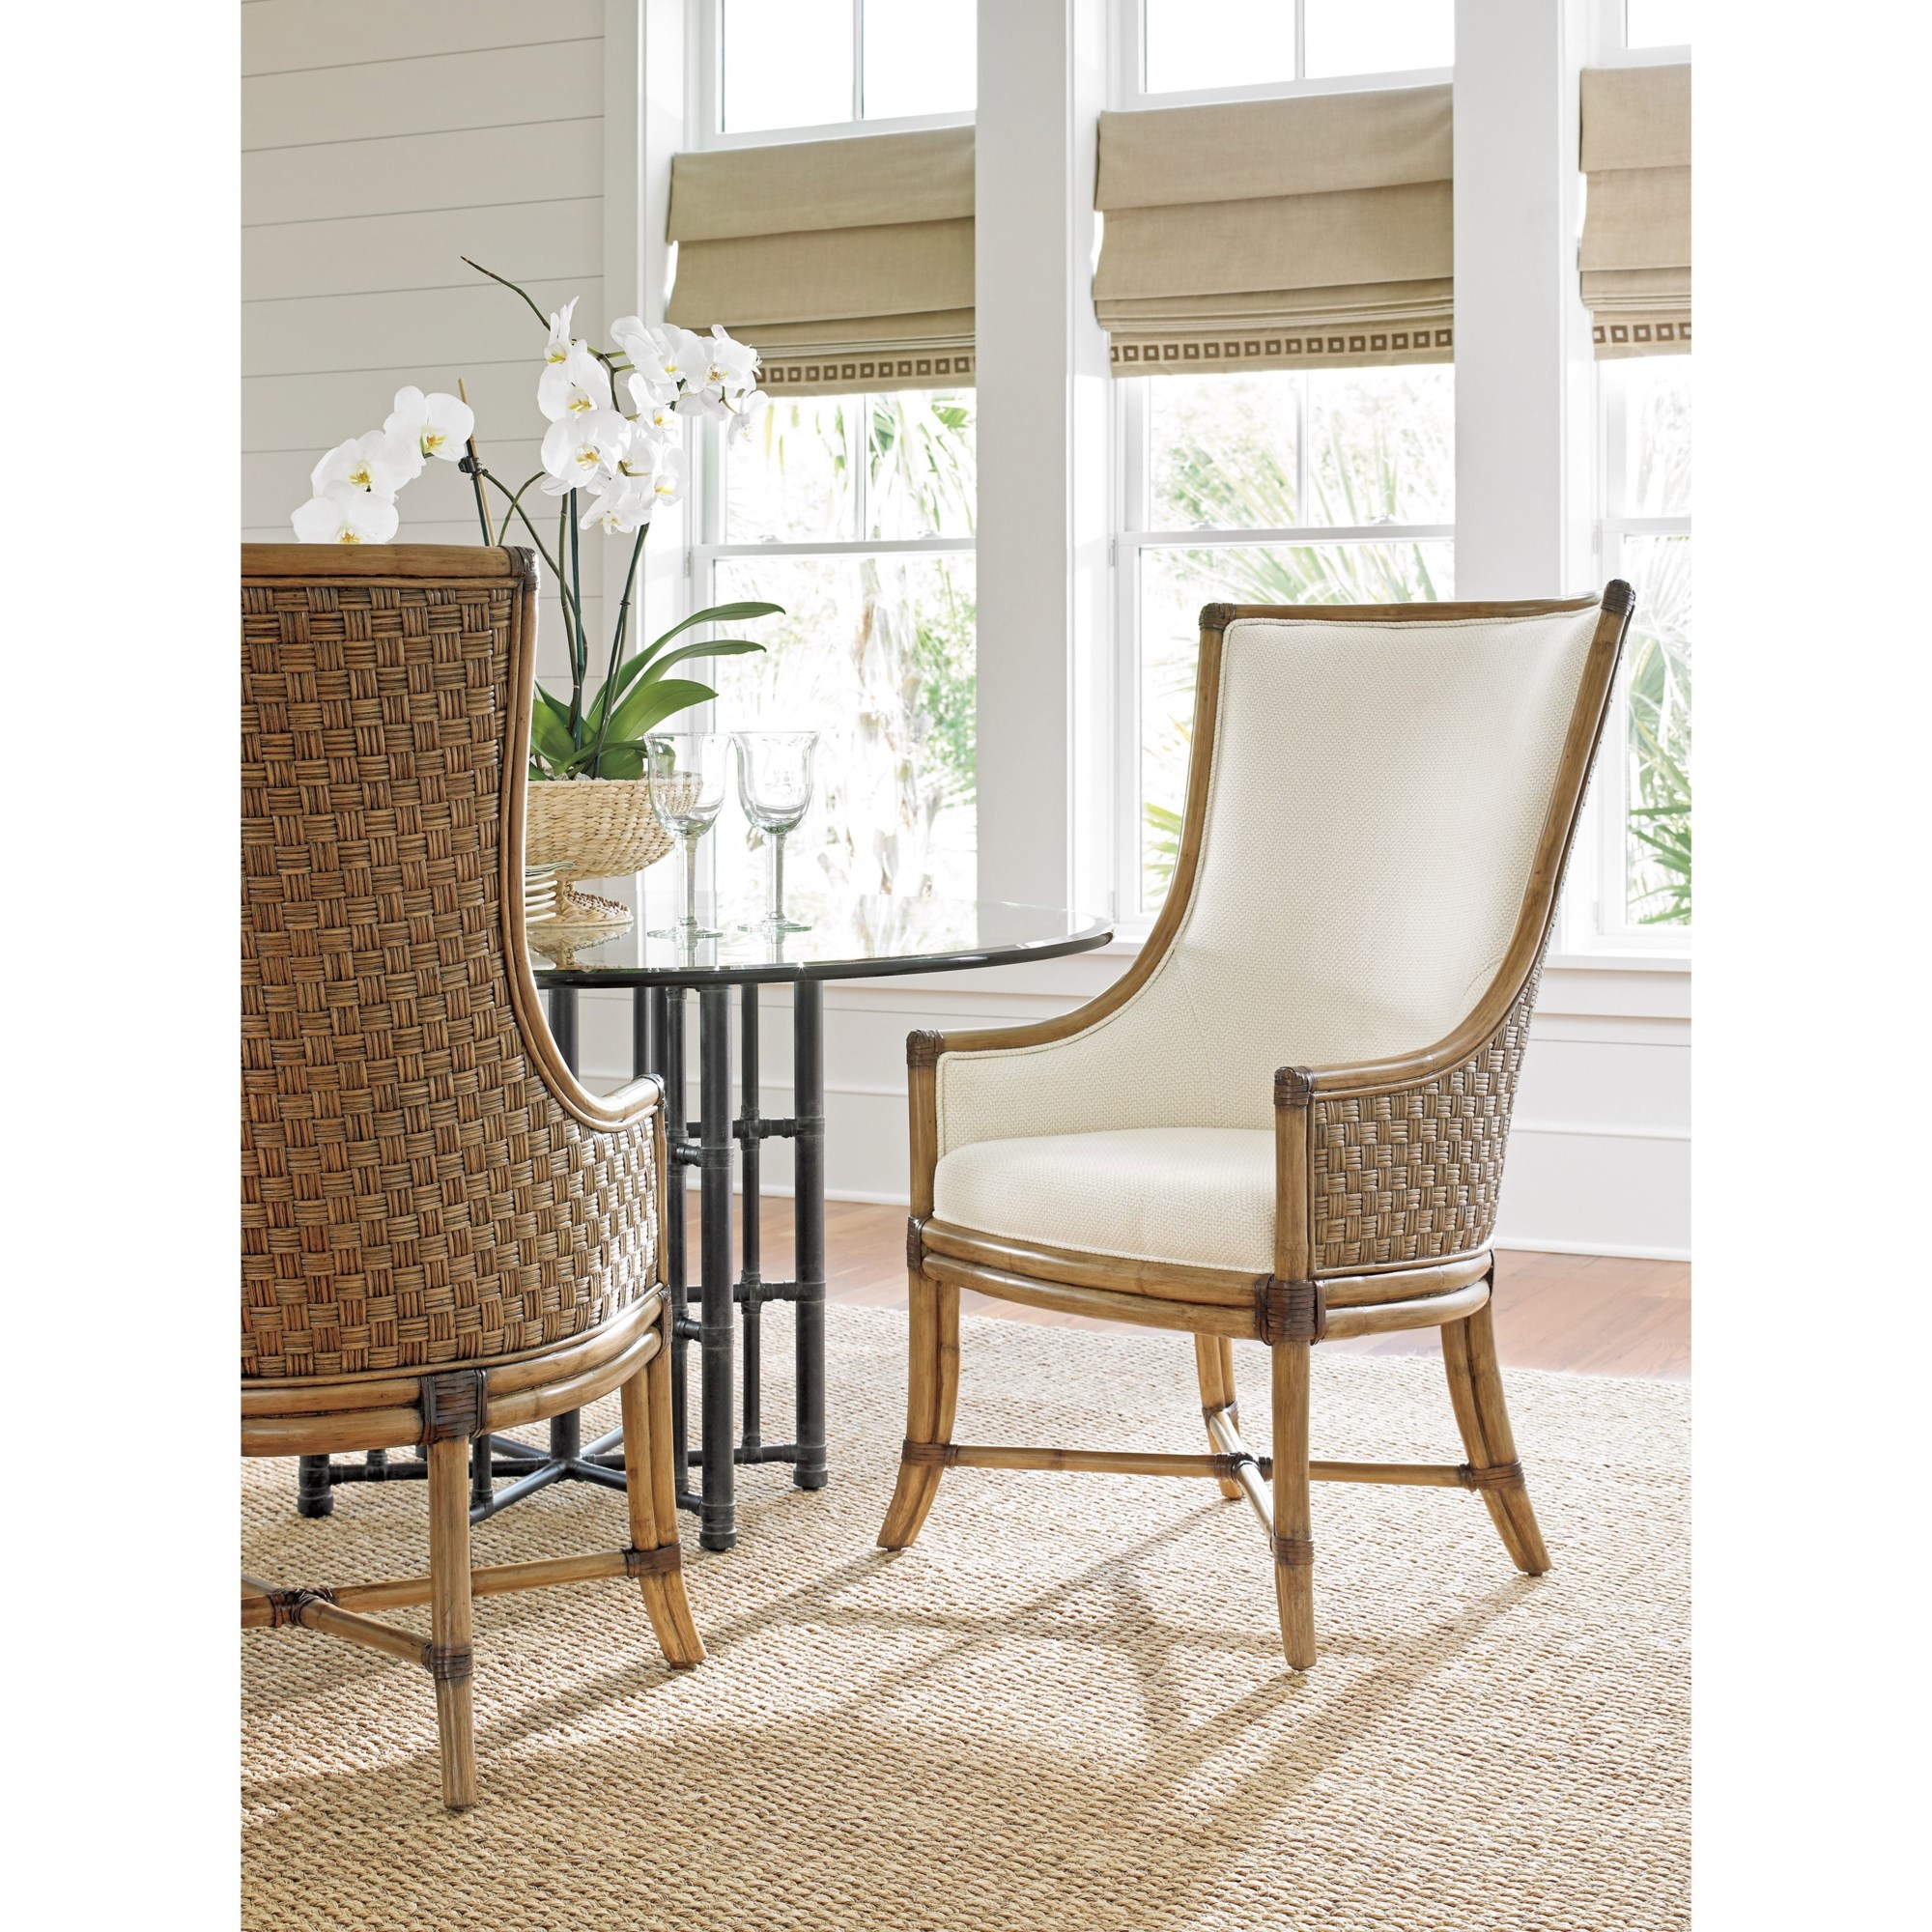 Home Dining in Woven Furniture | Dollar Sand Belfort Ivory Twin Arm 558-885-01 | Palms Bahama Chair Fabric Tommy Host Balfour Rattan Chairs